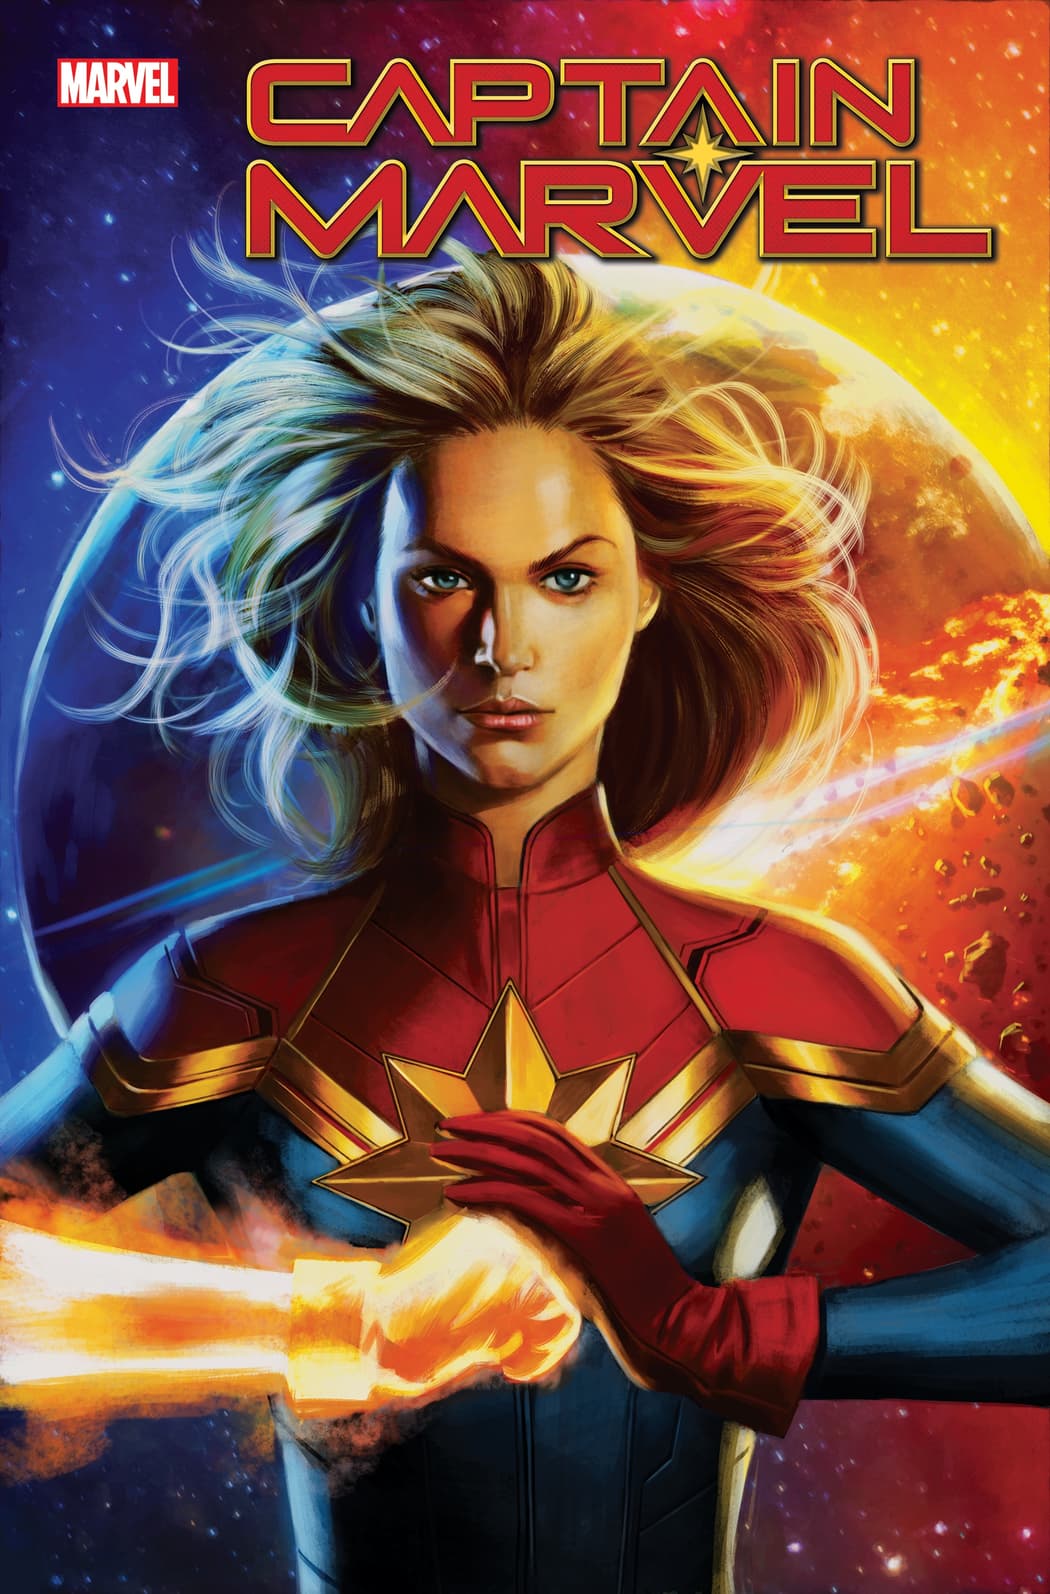 CAPTAIN MARVEL #22 WRITTEN BY KELLY THOMPSON, ART BY LEE GARBETT, COVER BY JORGE MOLINA